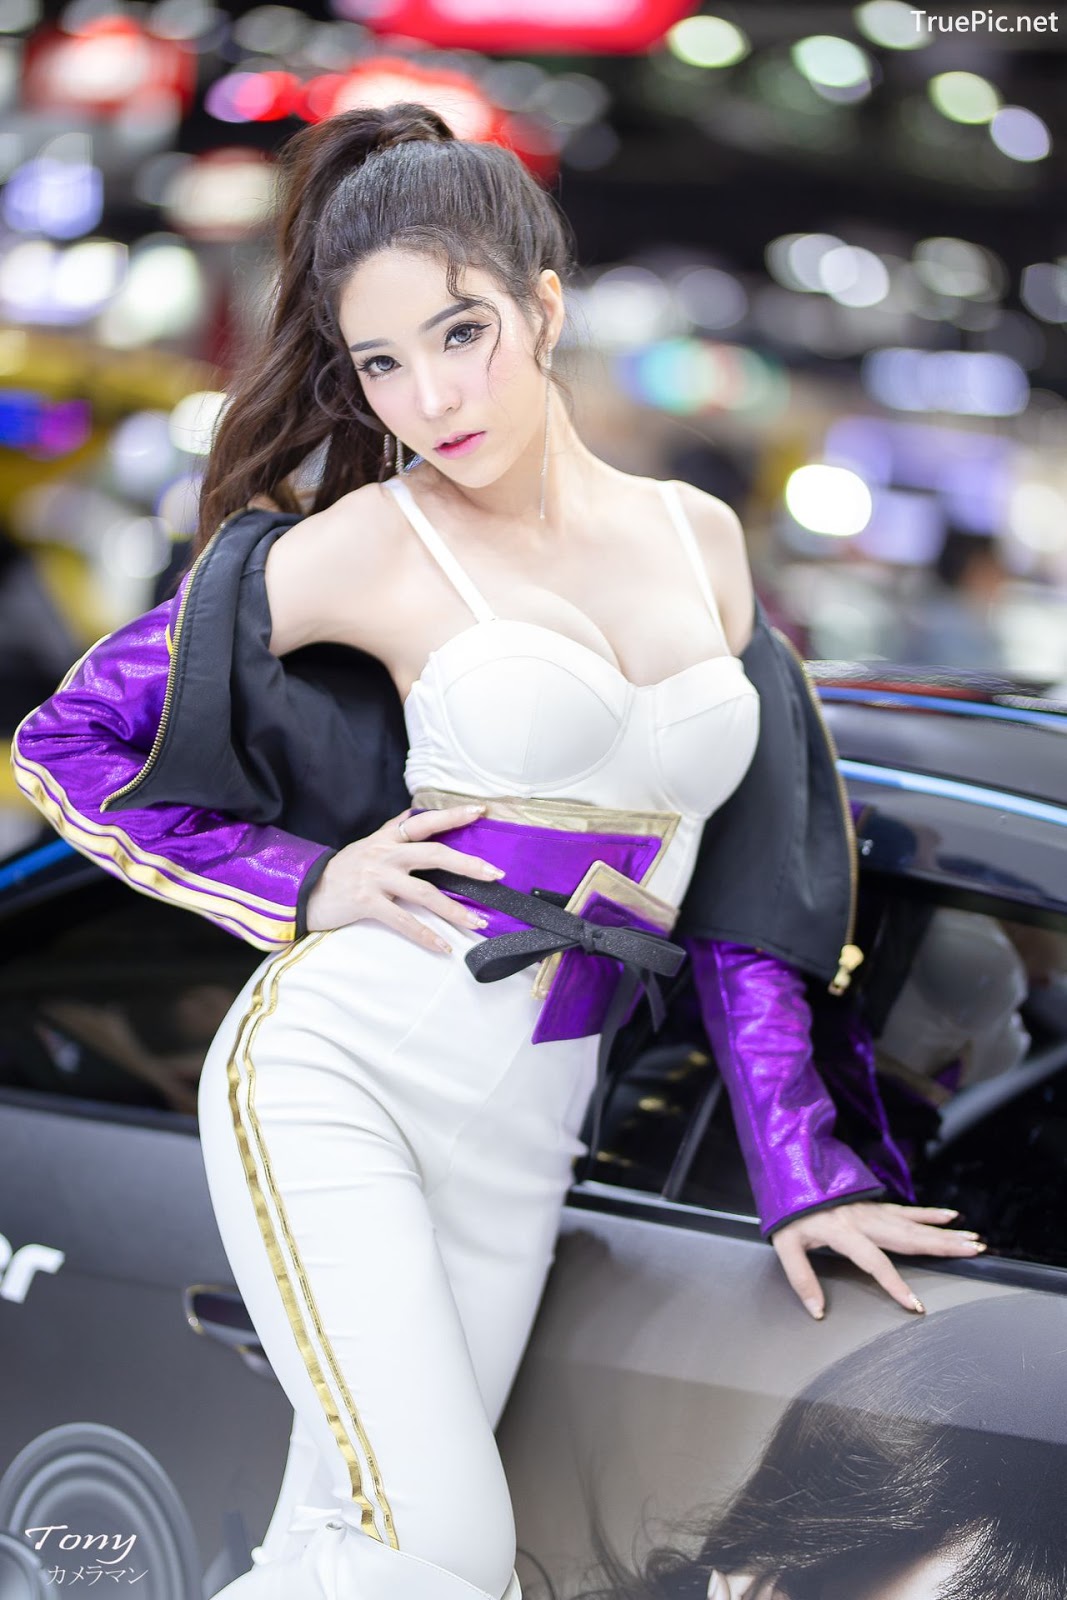 Image-Thailand-Hot-Model-Thai-Racing-Girl-At-Motor-Expo-2019-TruePic.net- Picture-125